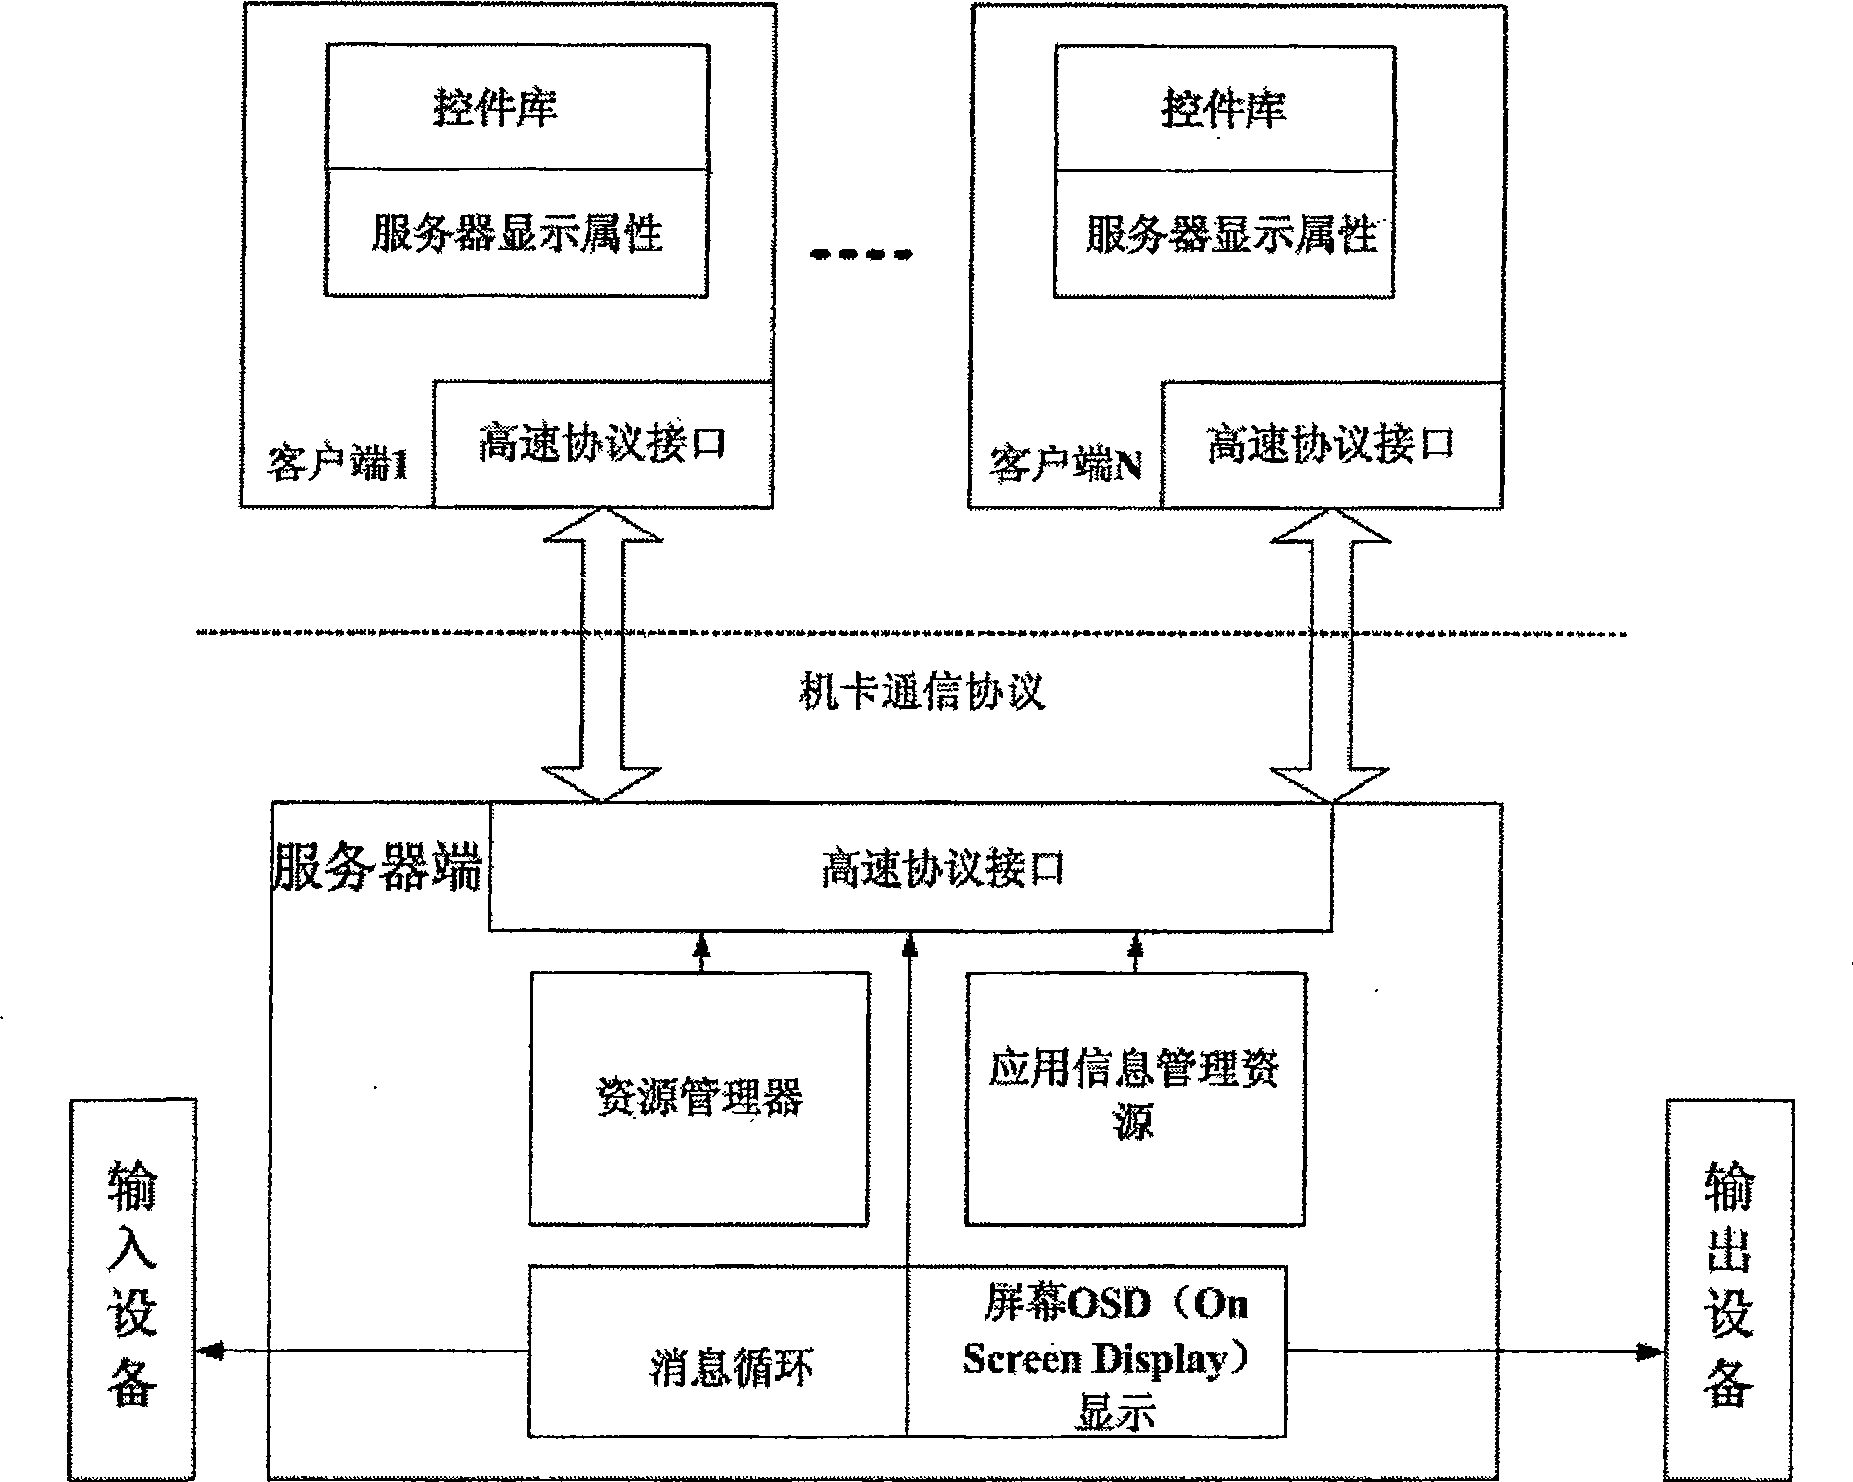 Machine-card separated graphic system based on C/S structure